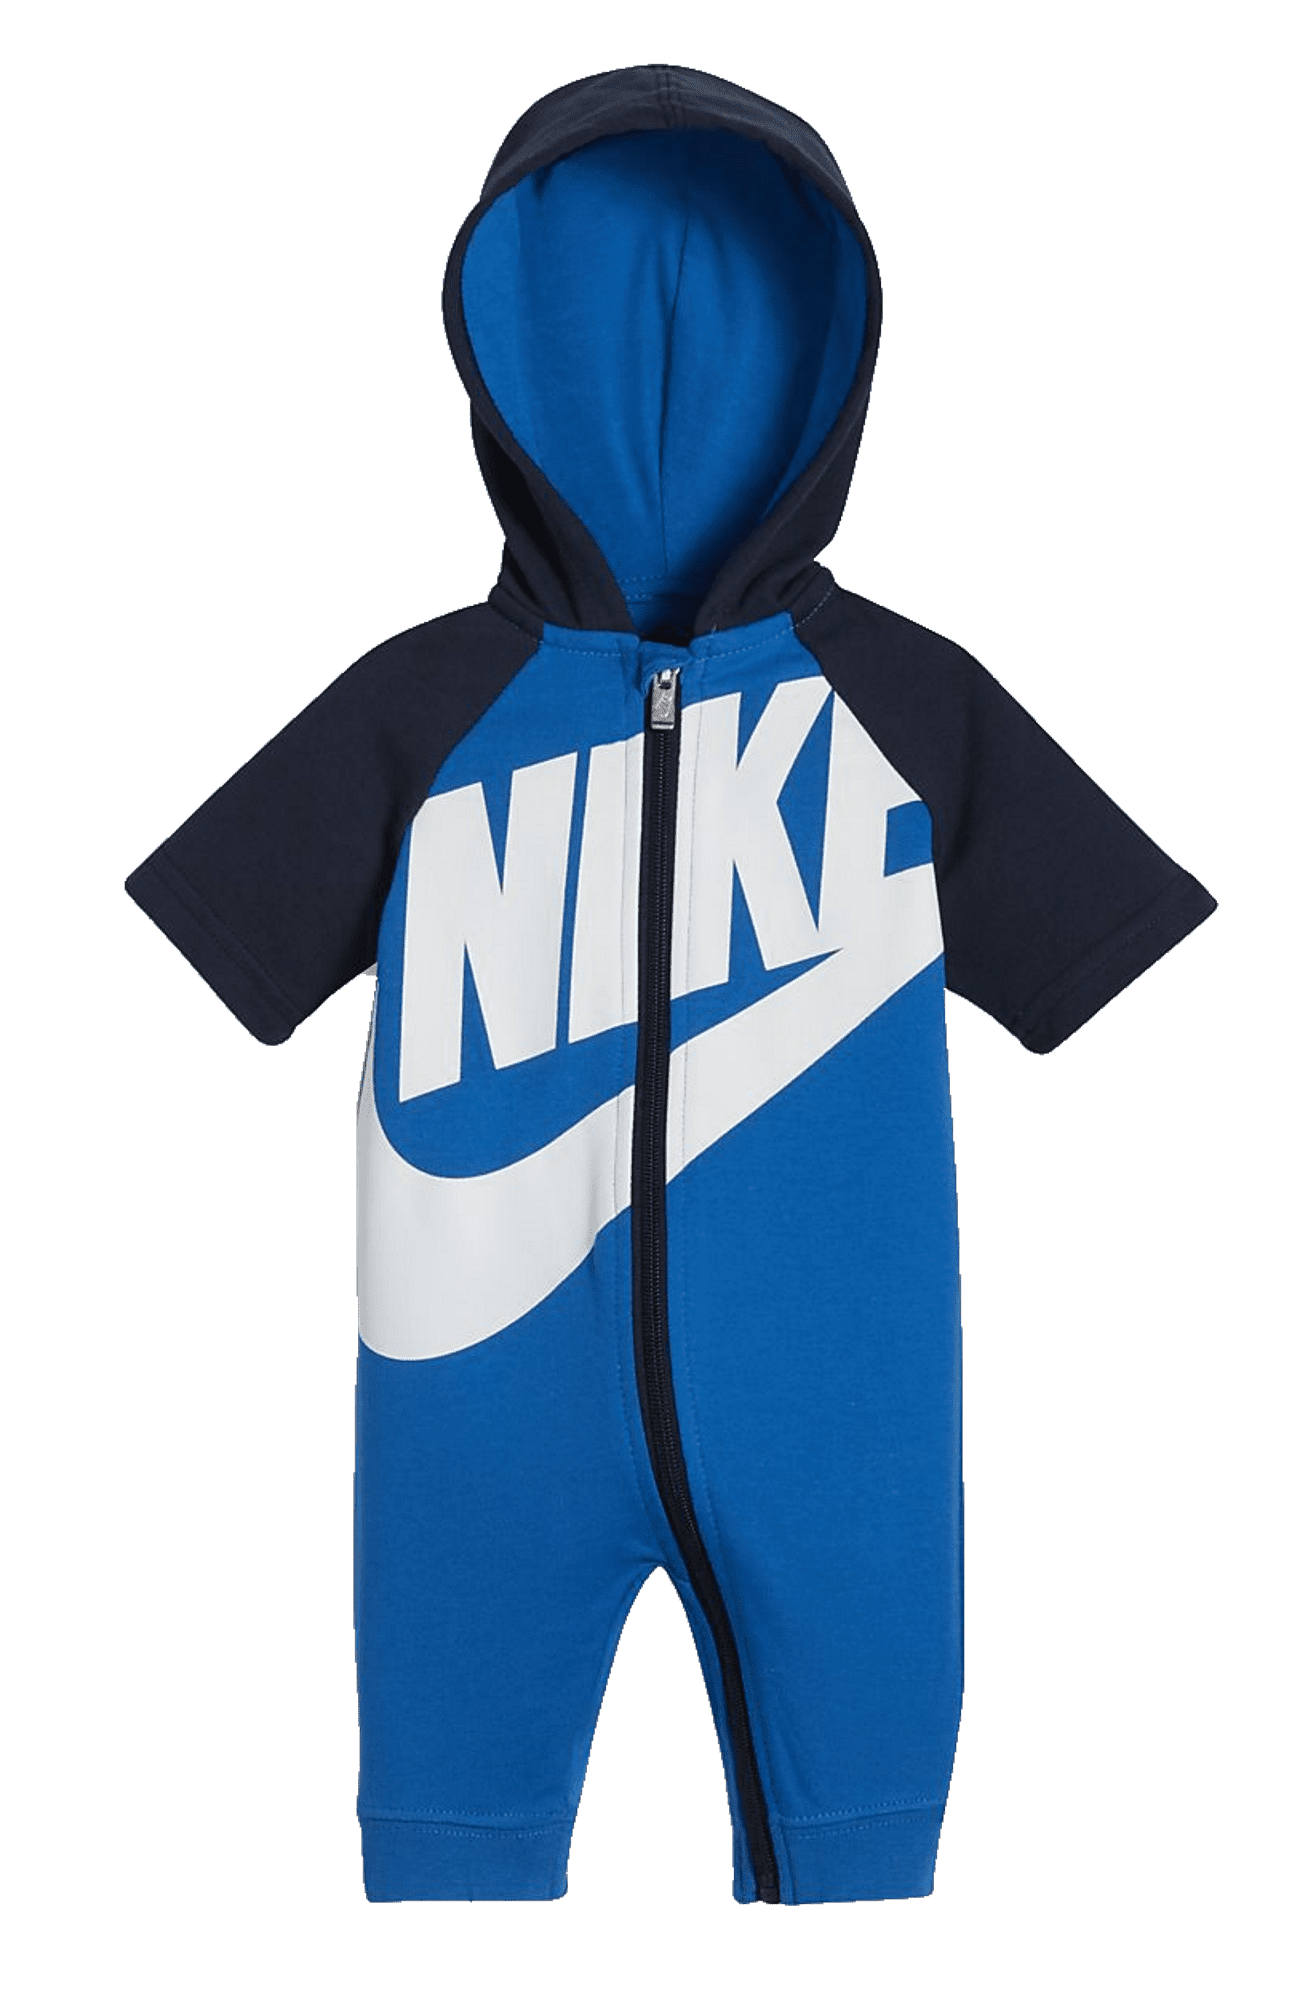 Nike - NIKE Infant French Terry Hooded Coverall Size 12 Months ...